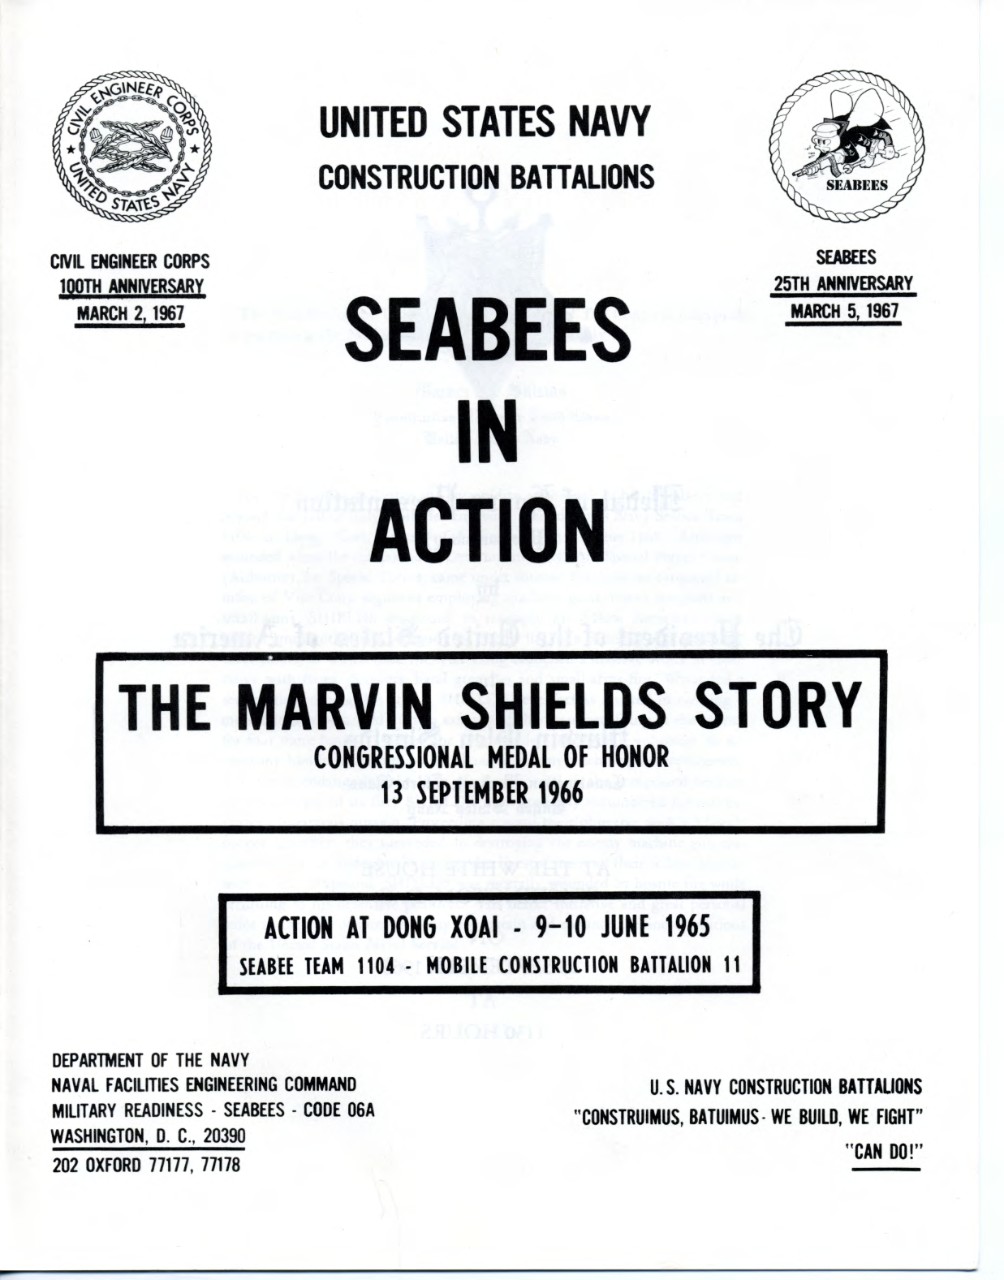 Seabees in Action Marvin Shields image